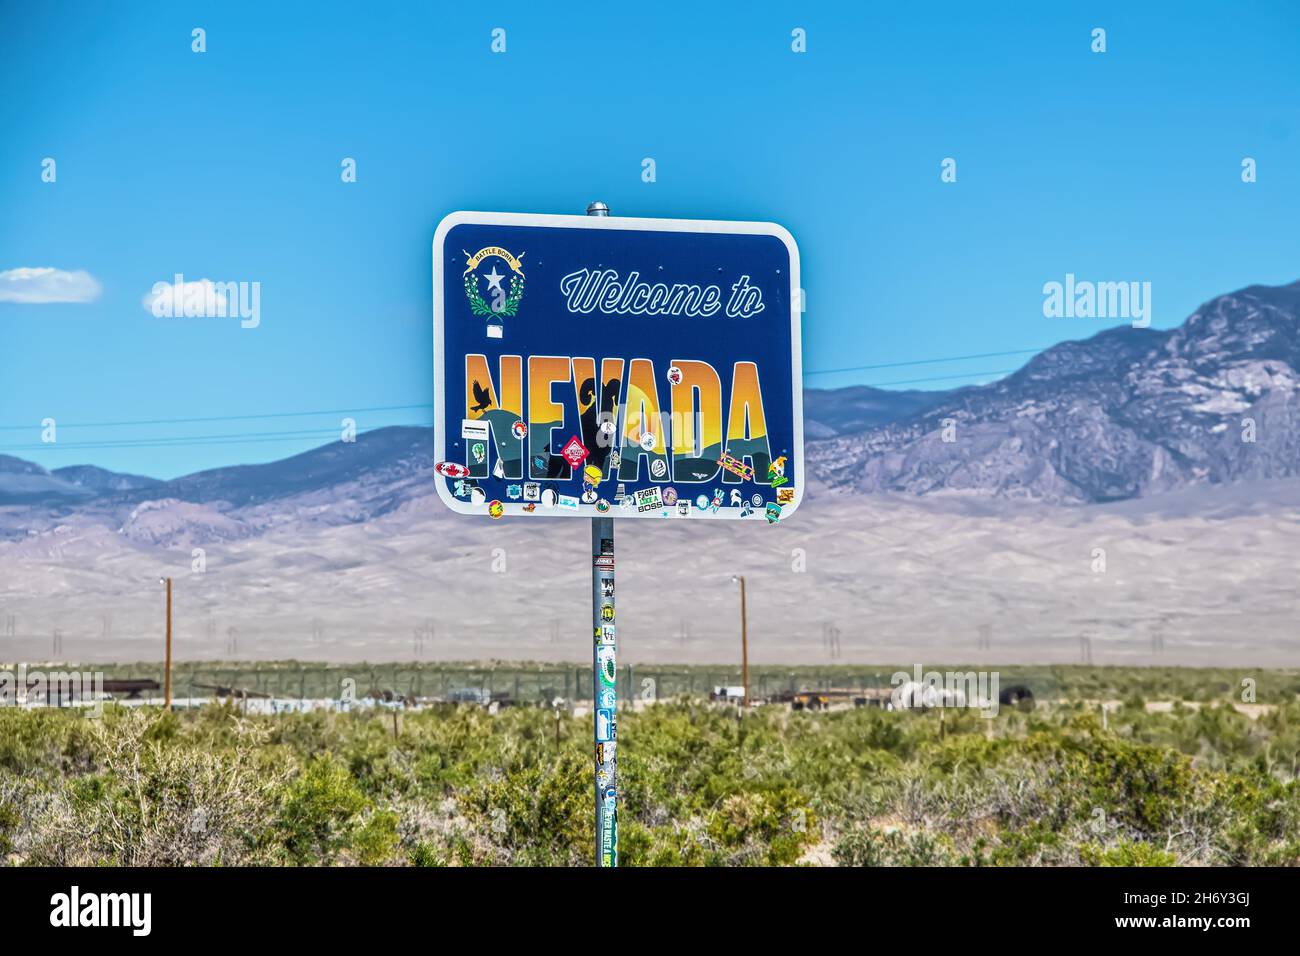 2021 06 Nevada border USA - Welcome to Nevada sign with stickers partly covering it with wire fence and desolate purple mountains blurred in backgroun Stock Photo